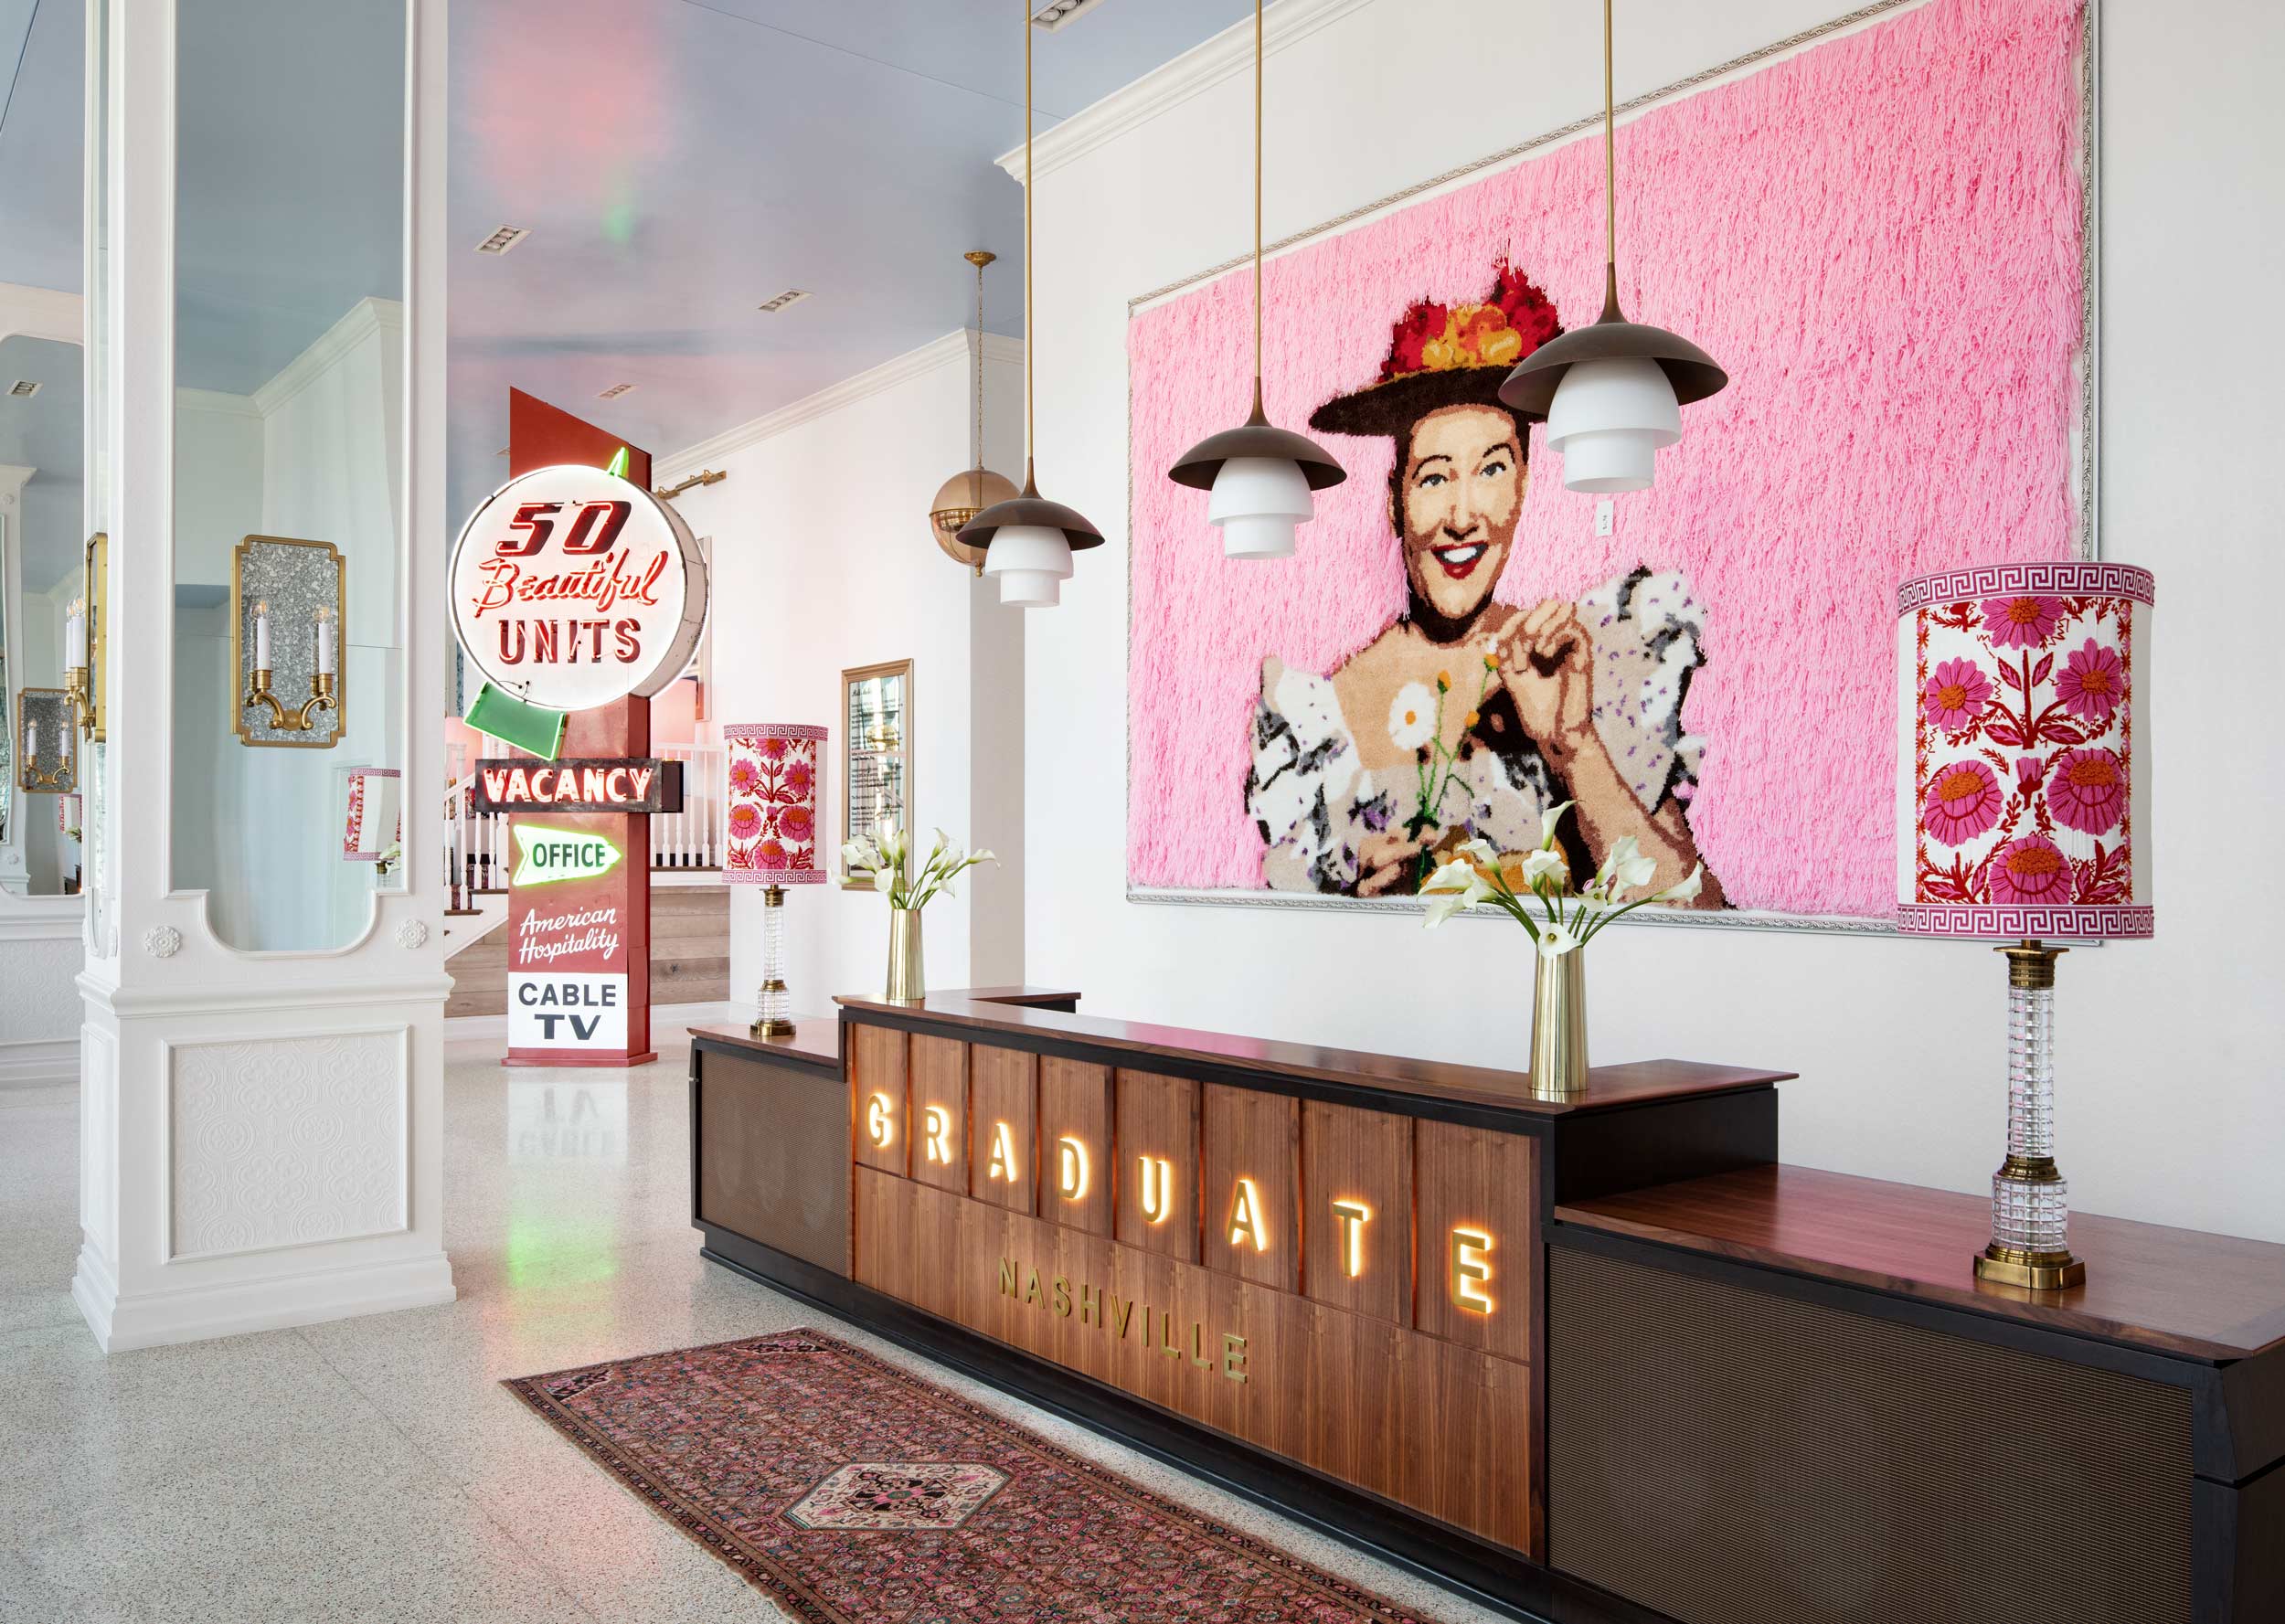 Check In Lobby Desk of Graduate Hotel Nashville with Neon Signs and Minnie Pearl Art